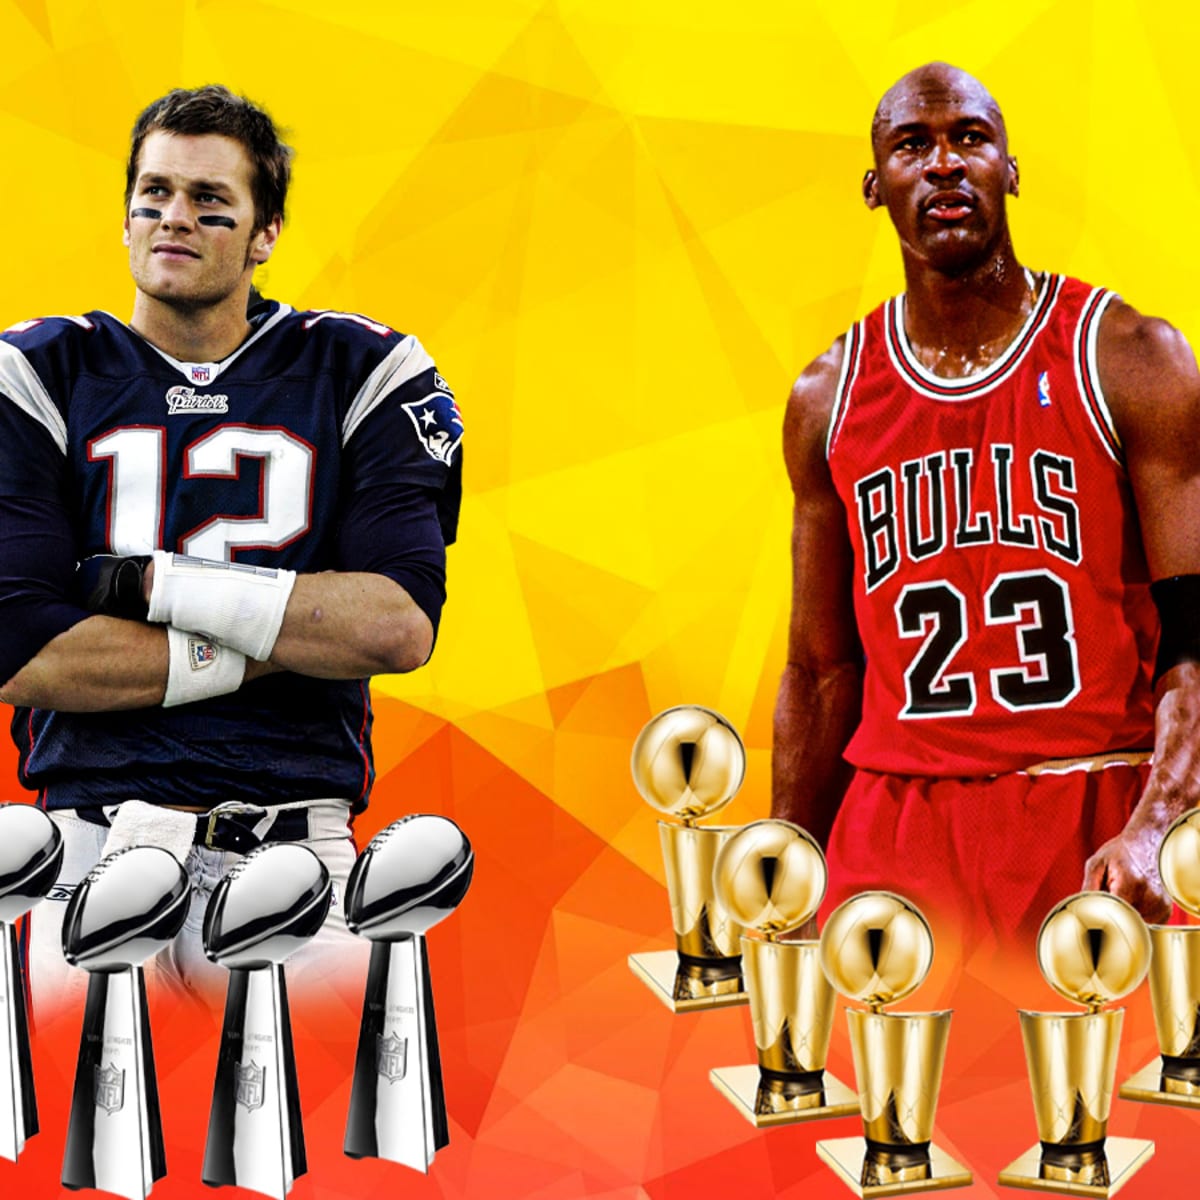 NFL: Peyton Manning's mom stopped Tom Brady from more Super Bowl wins